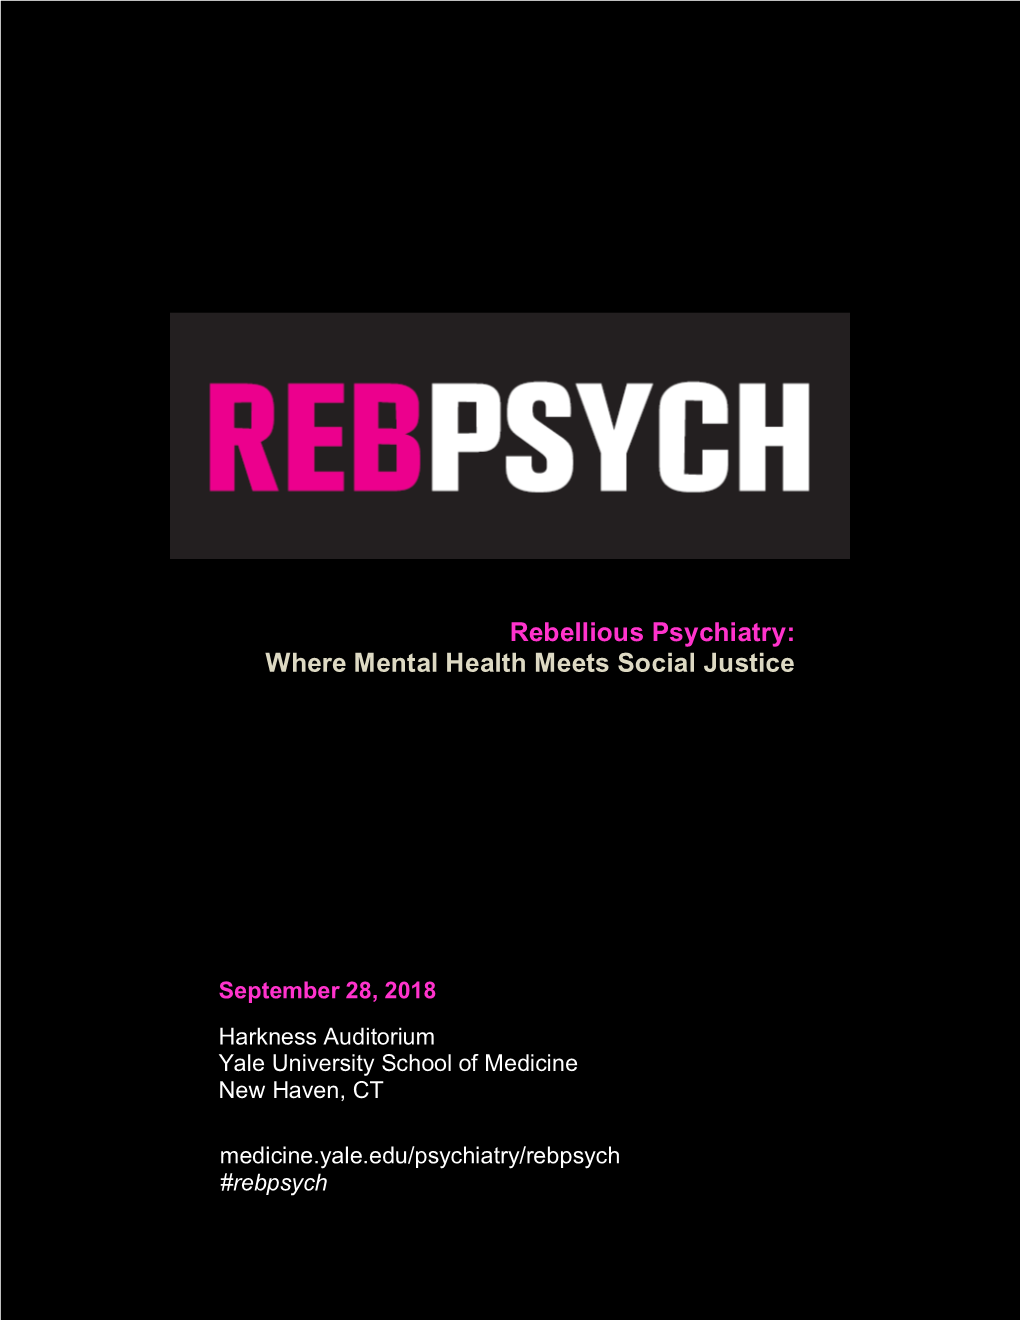 Rebellious Psychiatry: Where Mental Health Meets Social Justice